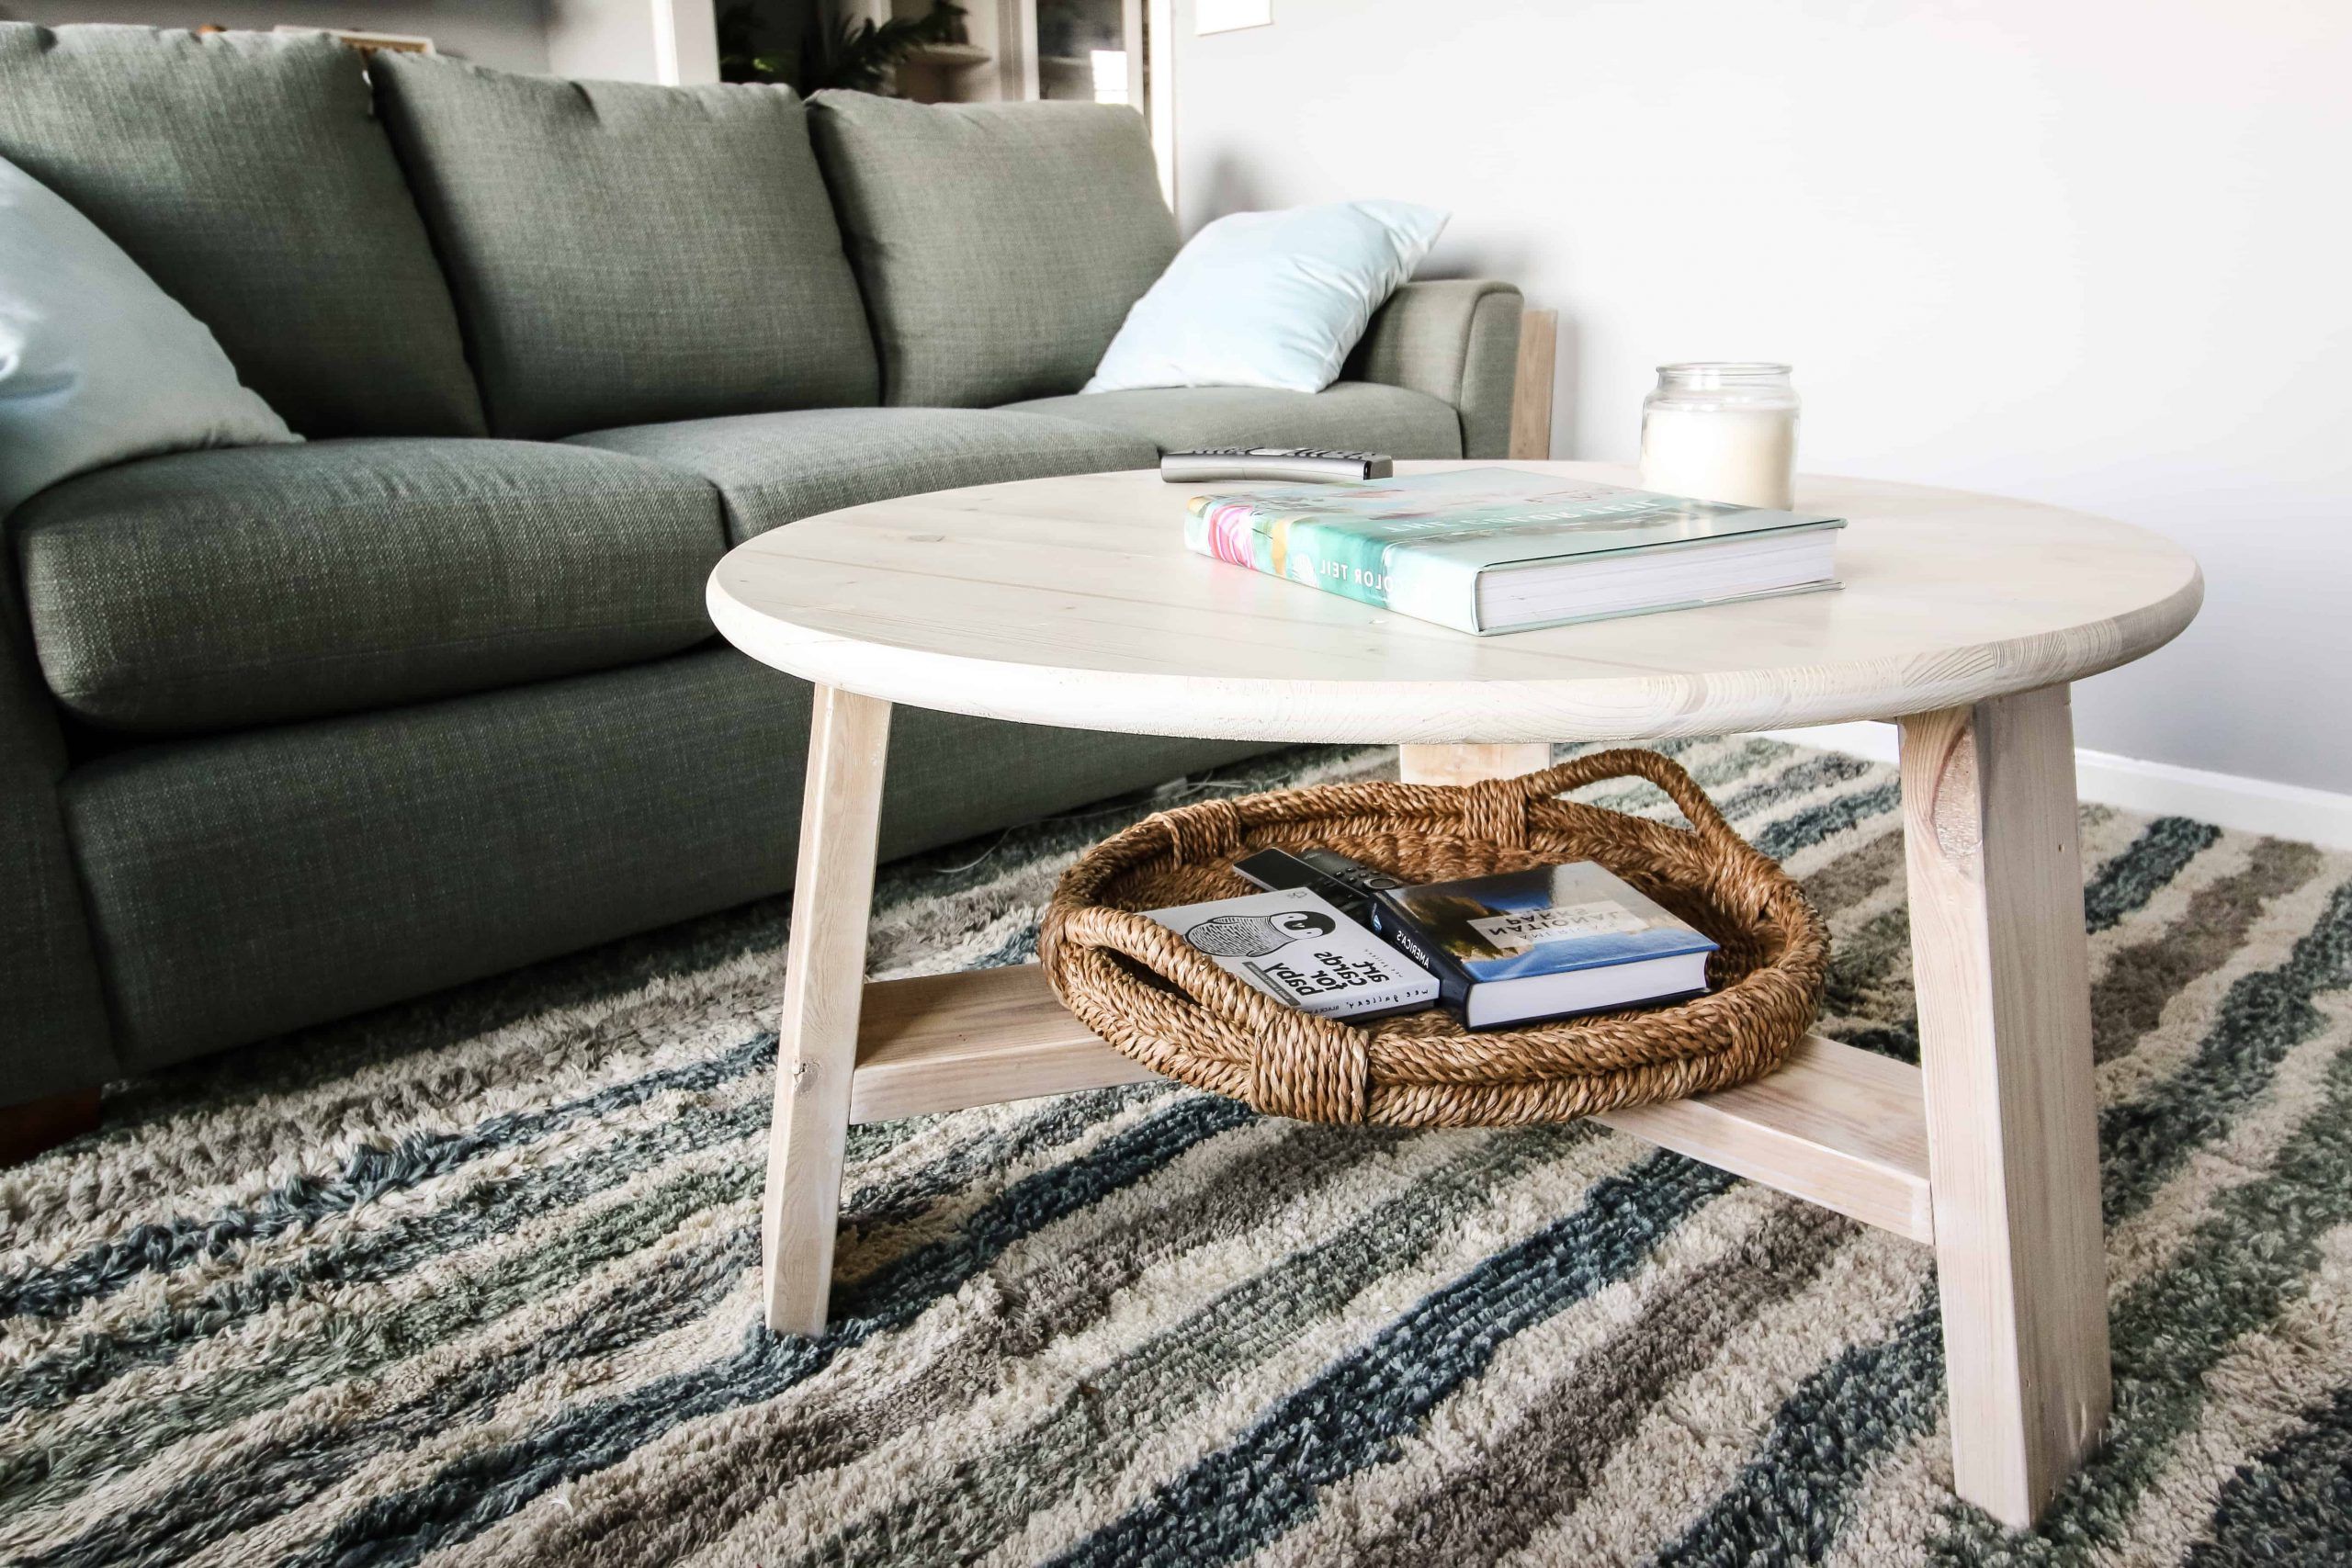 Widely Used How To Build An Easy, Modern, Diy Coffee Table Inside Simple Design Coffee Tables (View 11 of 15)